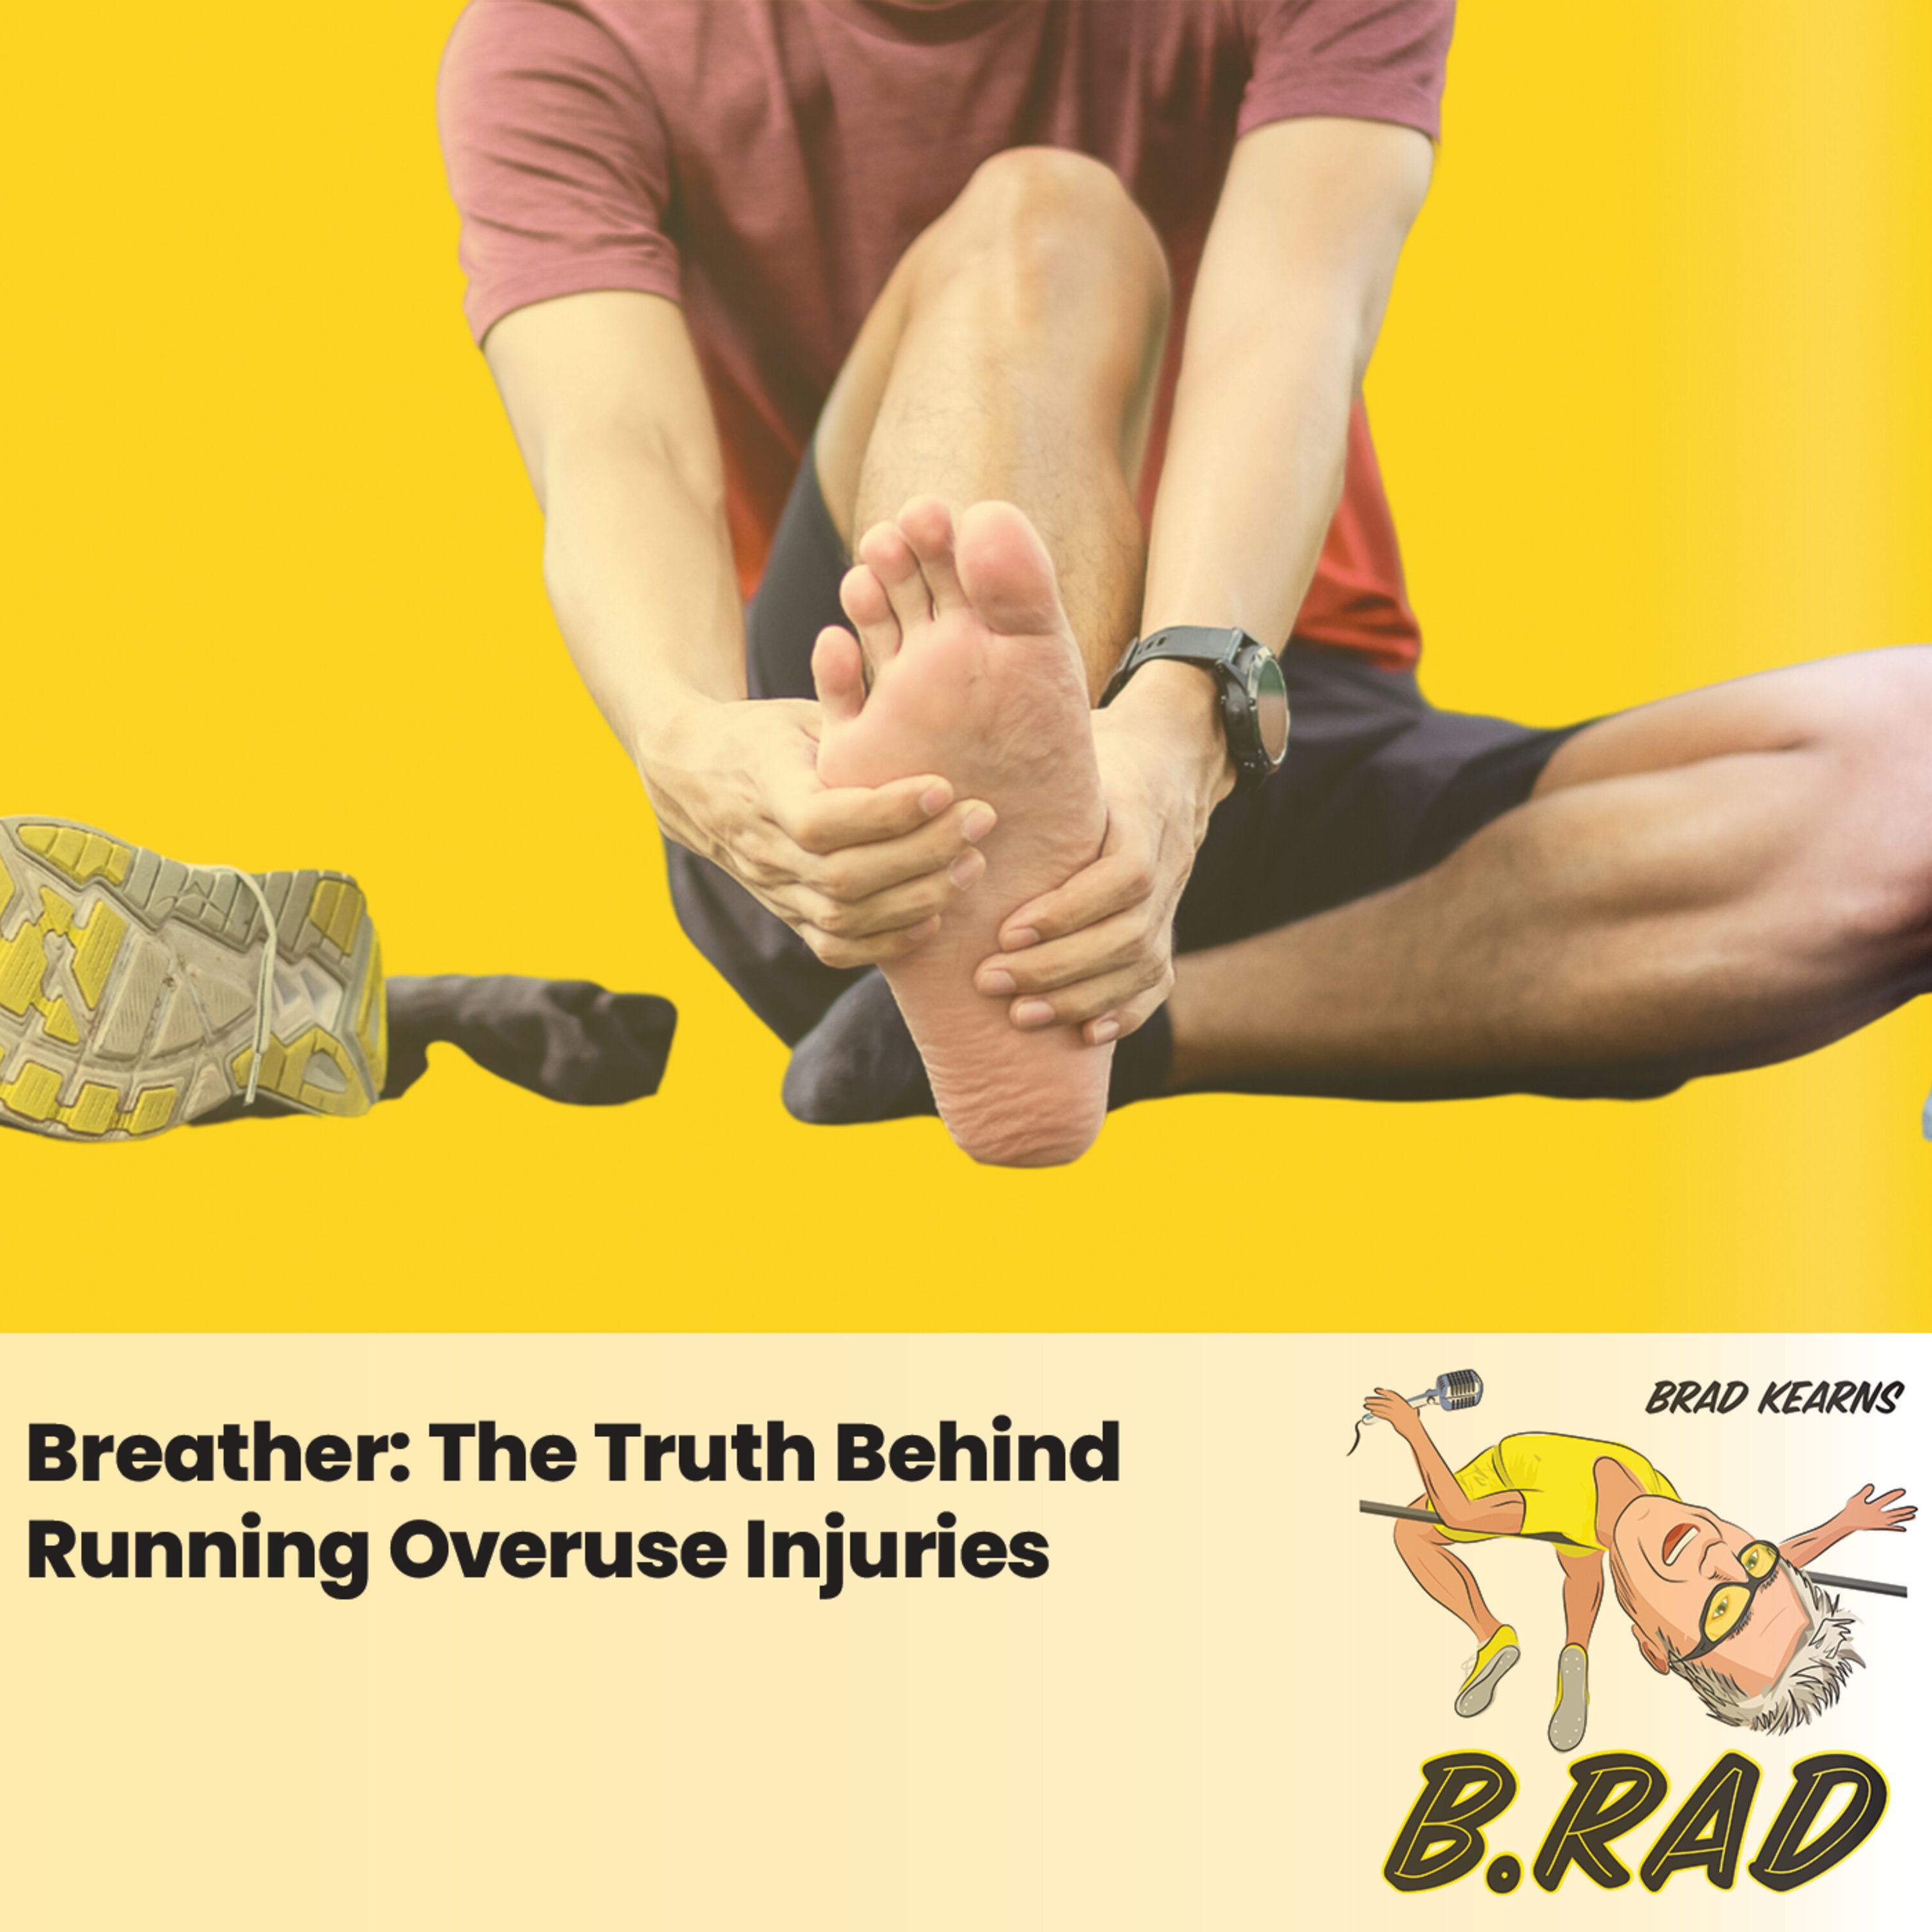 Breather: The Truth Behind Running Overuse Injuries